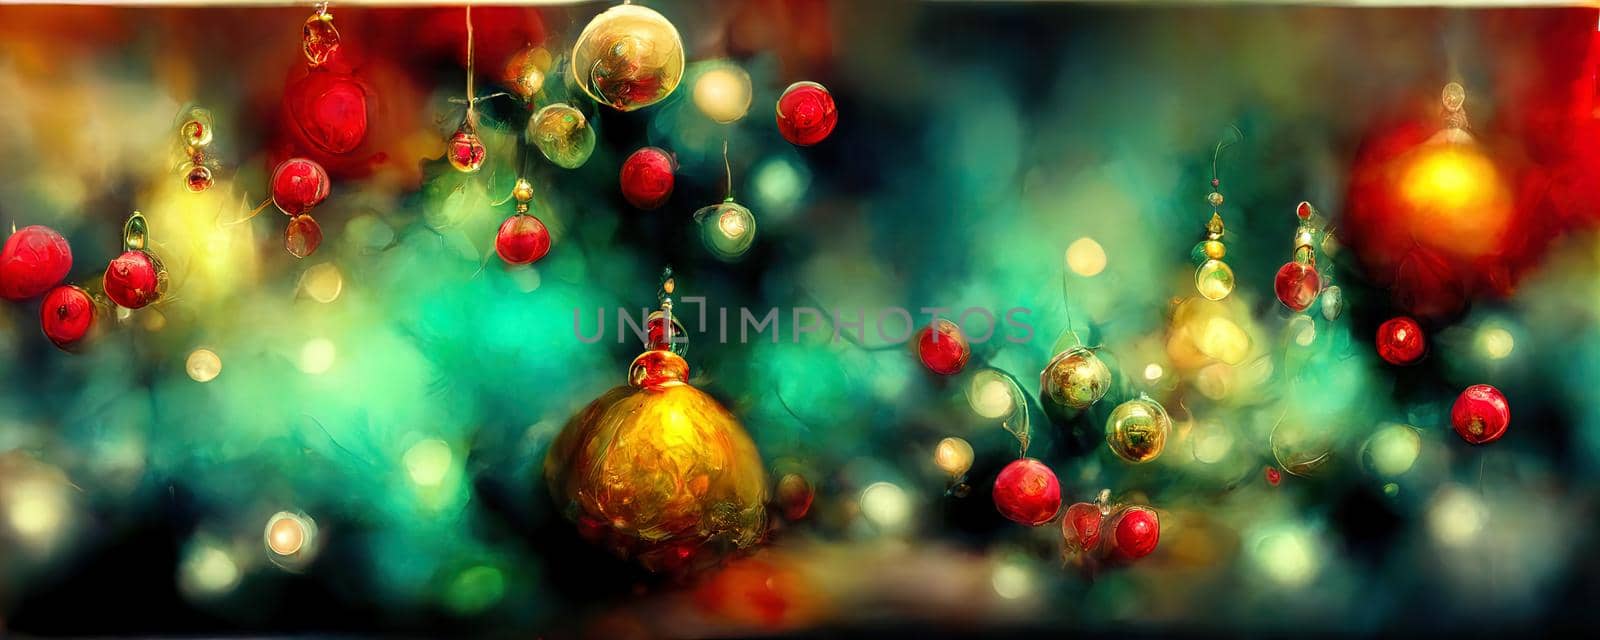 warm Christmas background of toys in vintage colors with a soft glow.